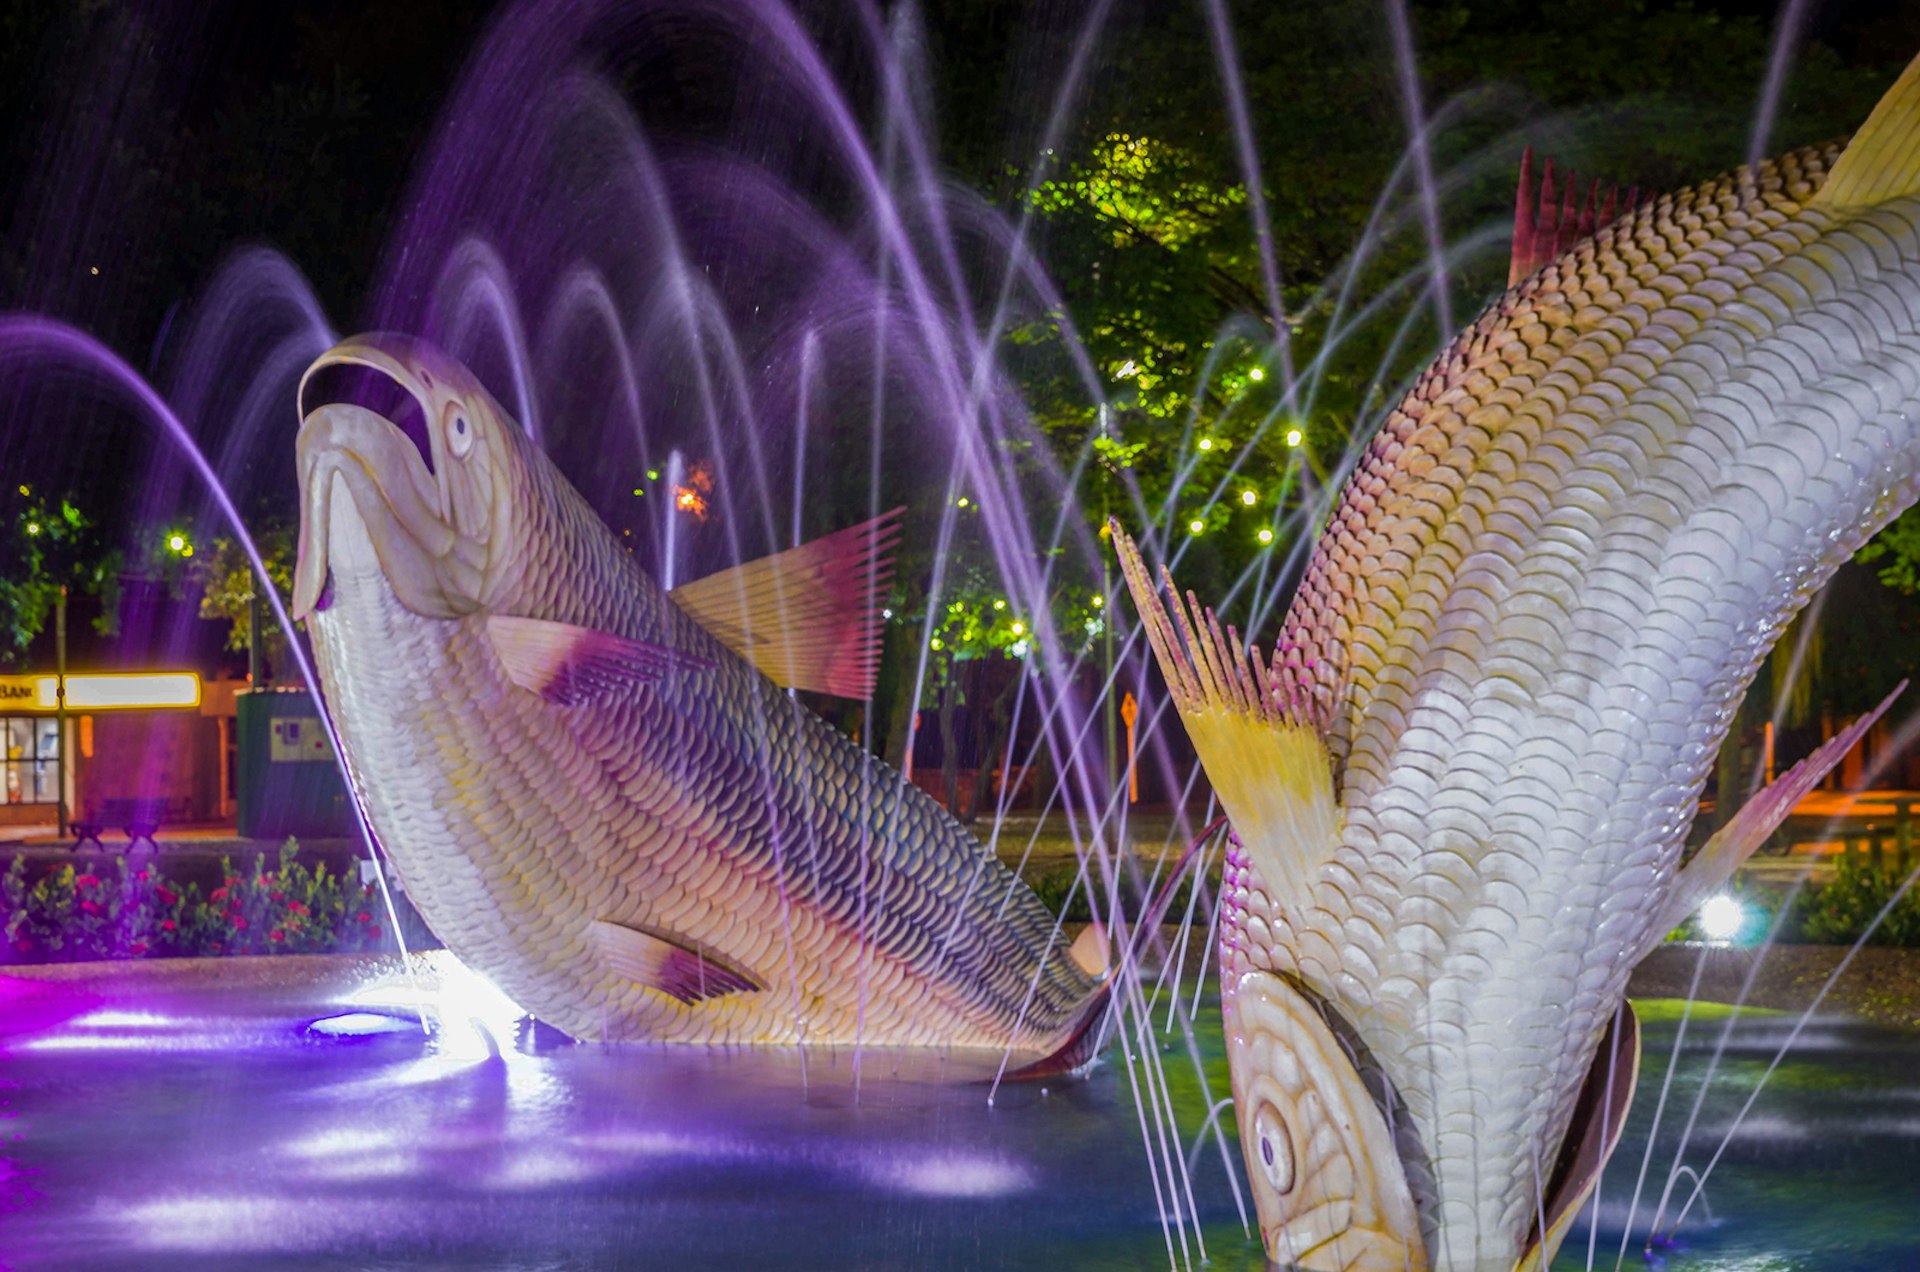 A close photo of two large fish statues in a fountain at night